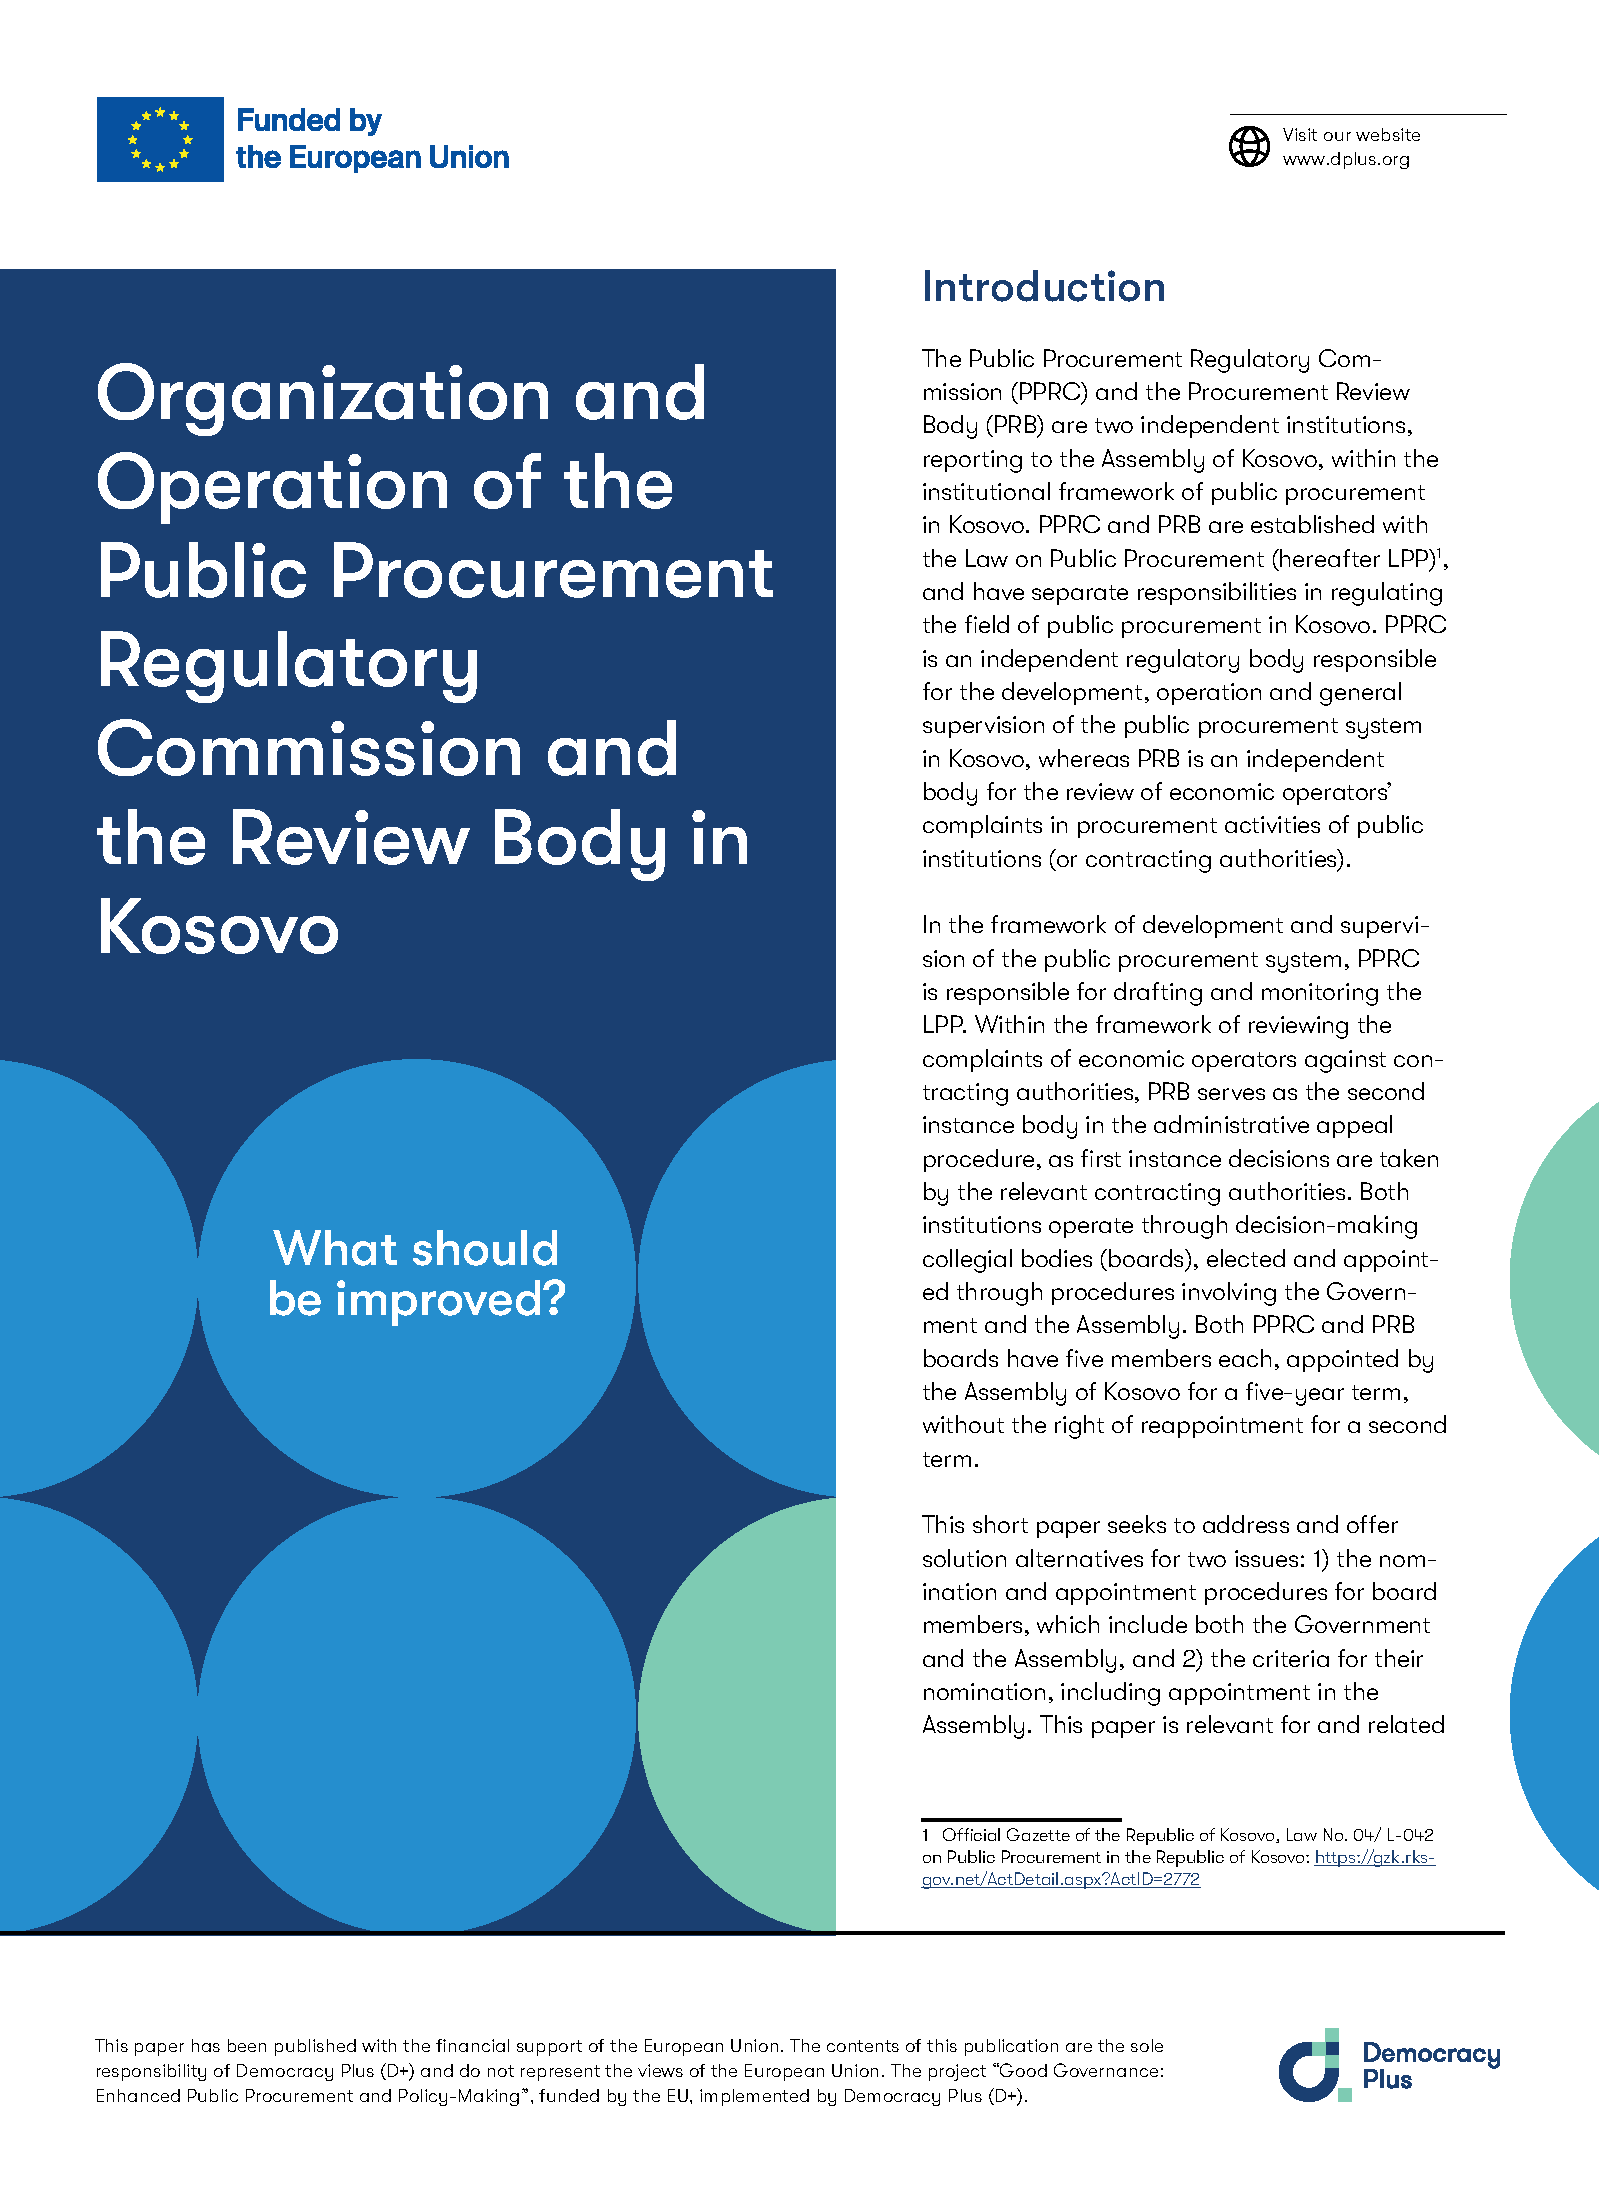 Organization and Operation of the Public Procurement Regulatory Commission and the Review Body in Kosovo